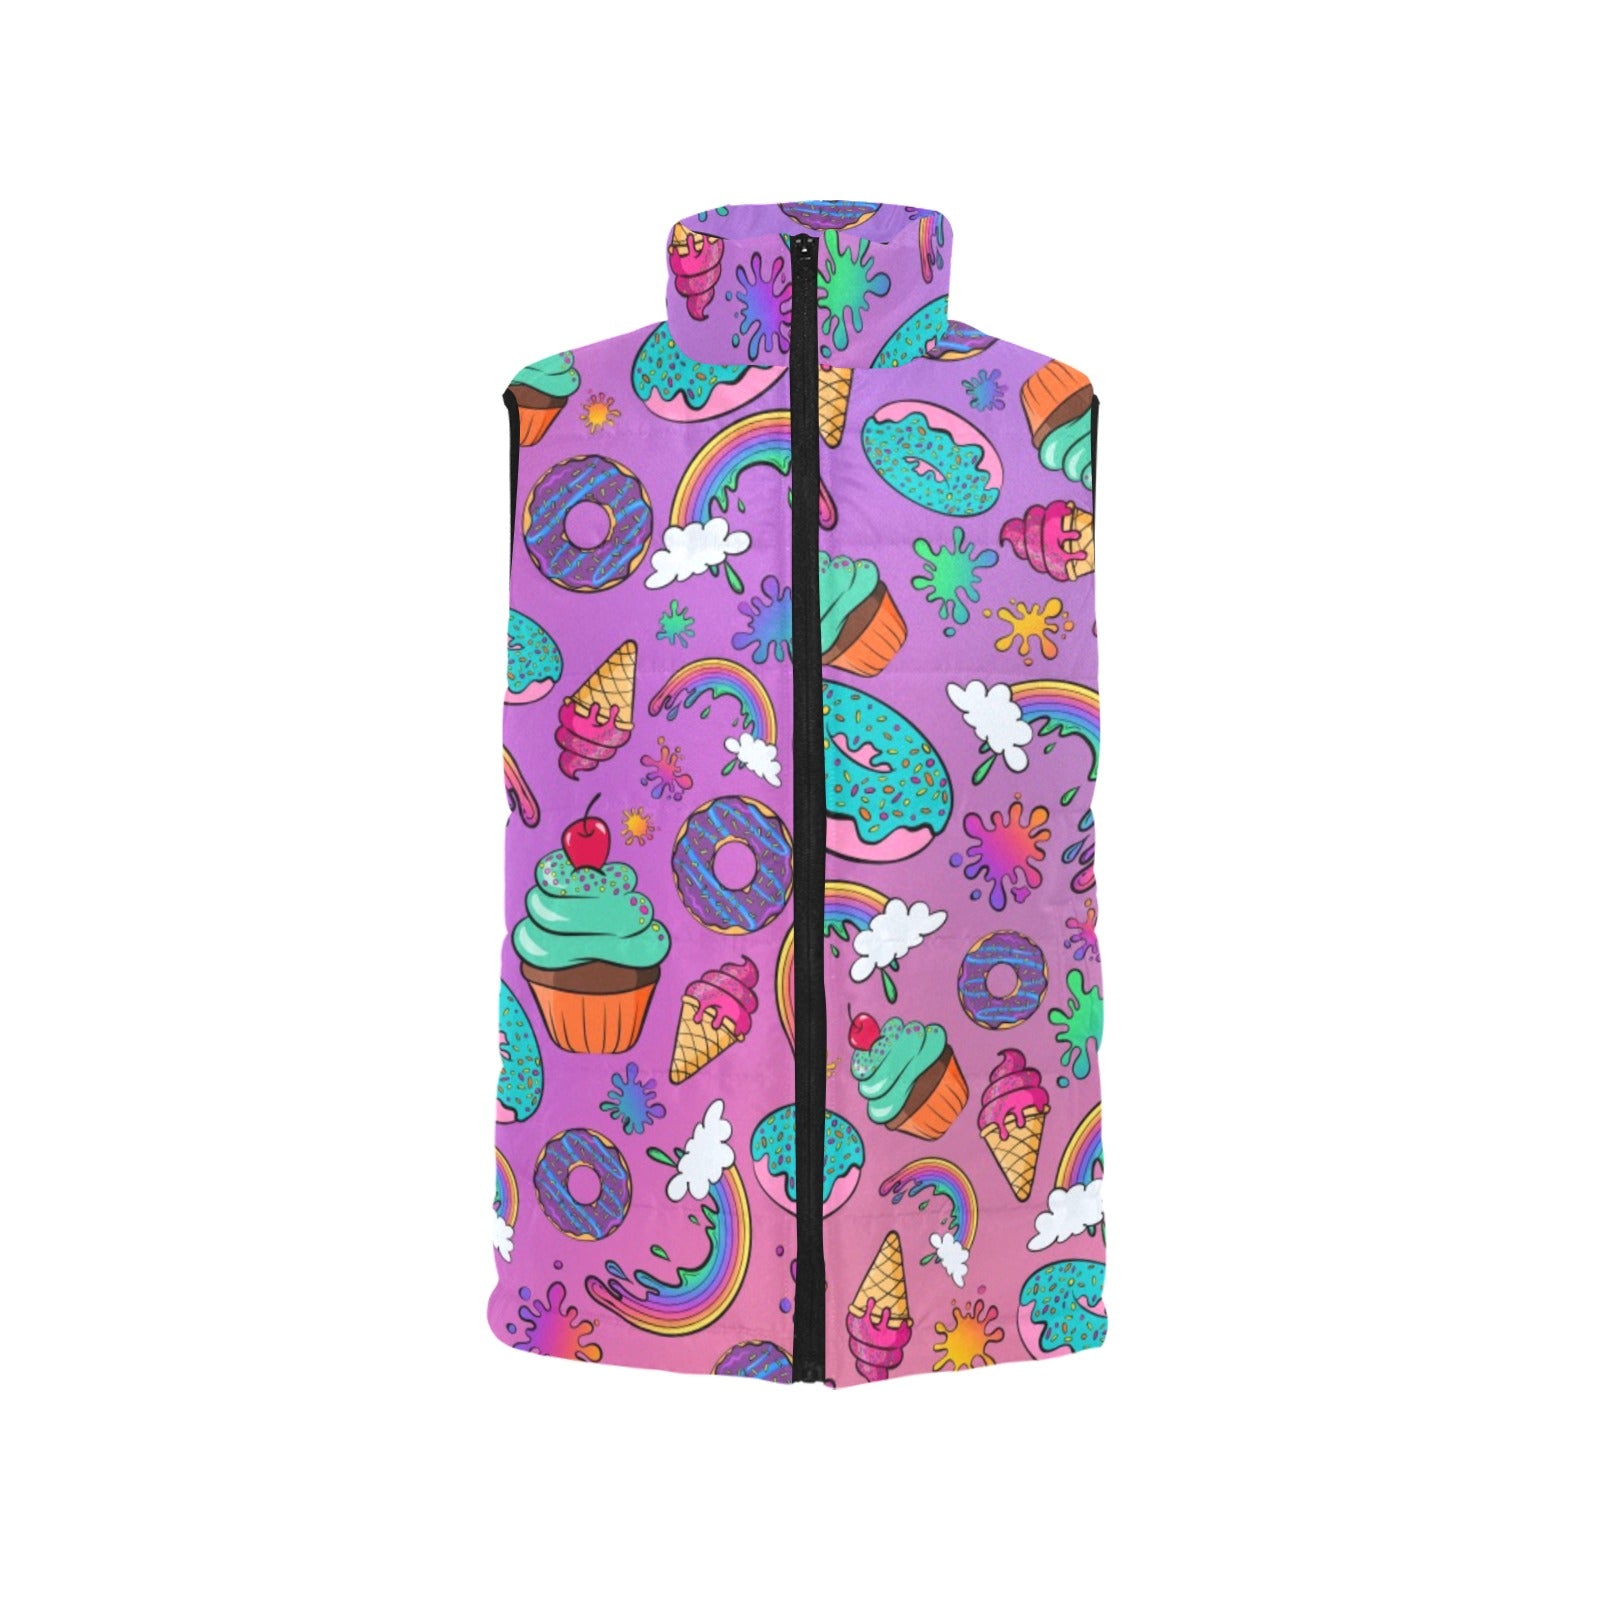 Rainbow padded vest with donuts, cup cakes and ice cream